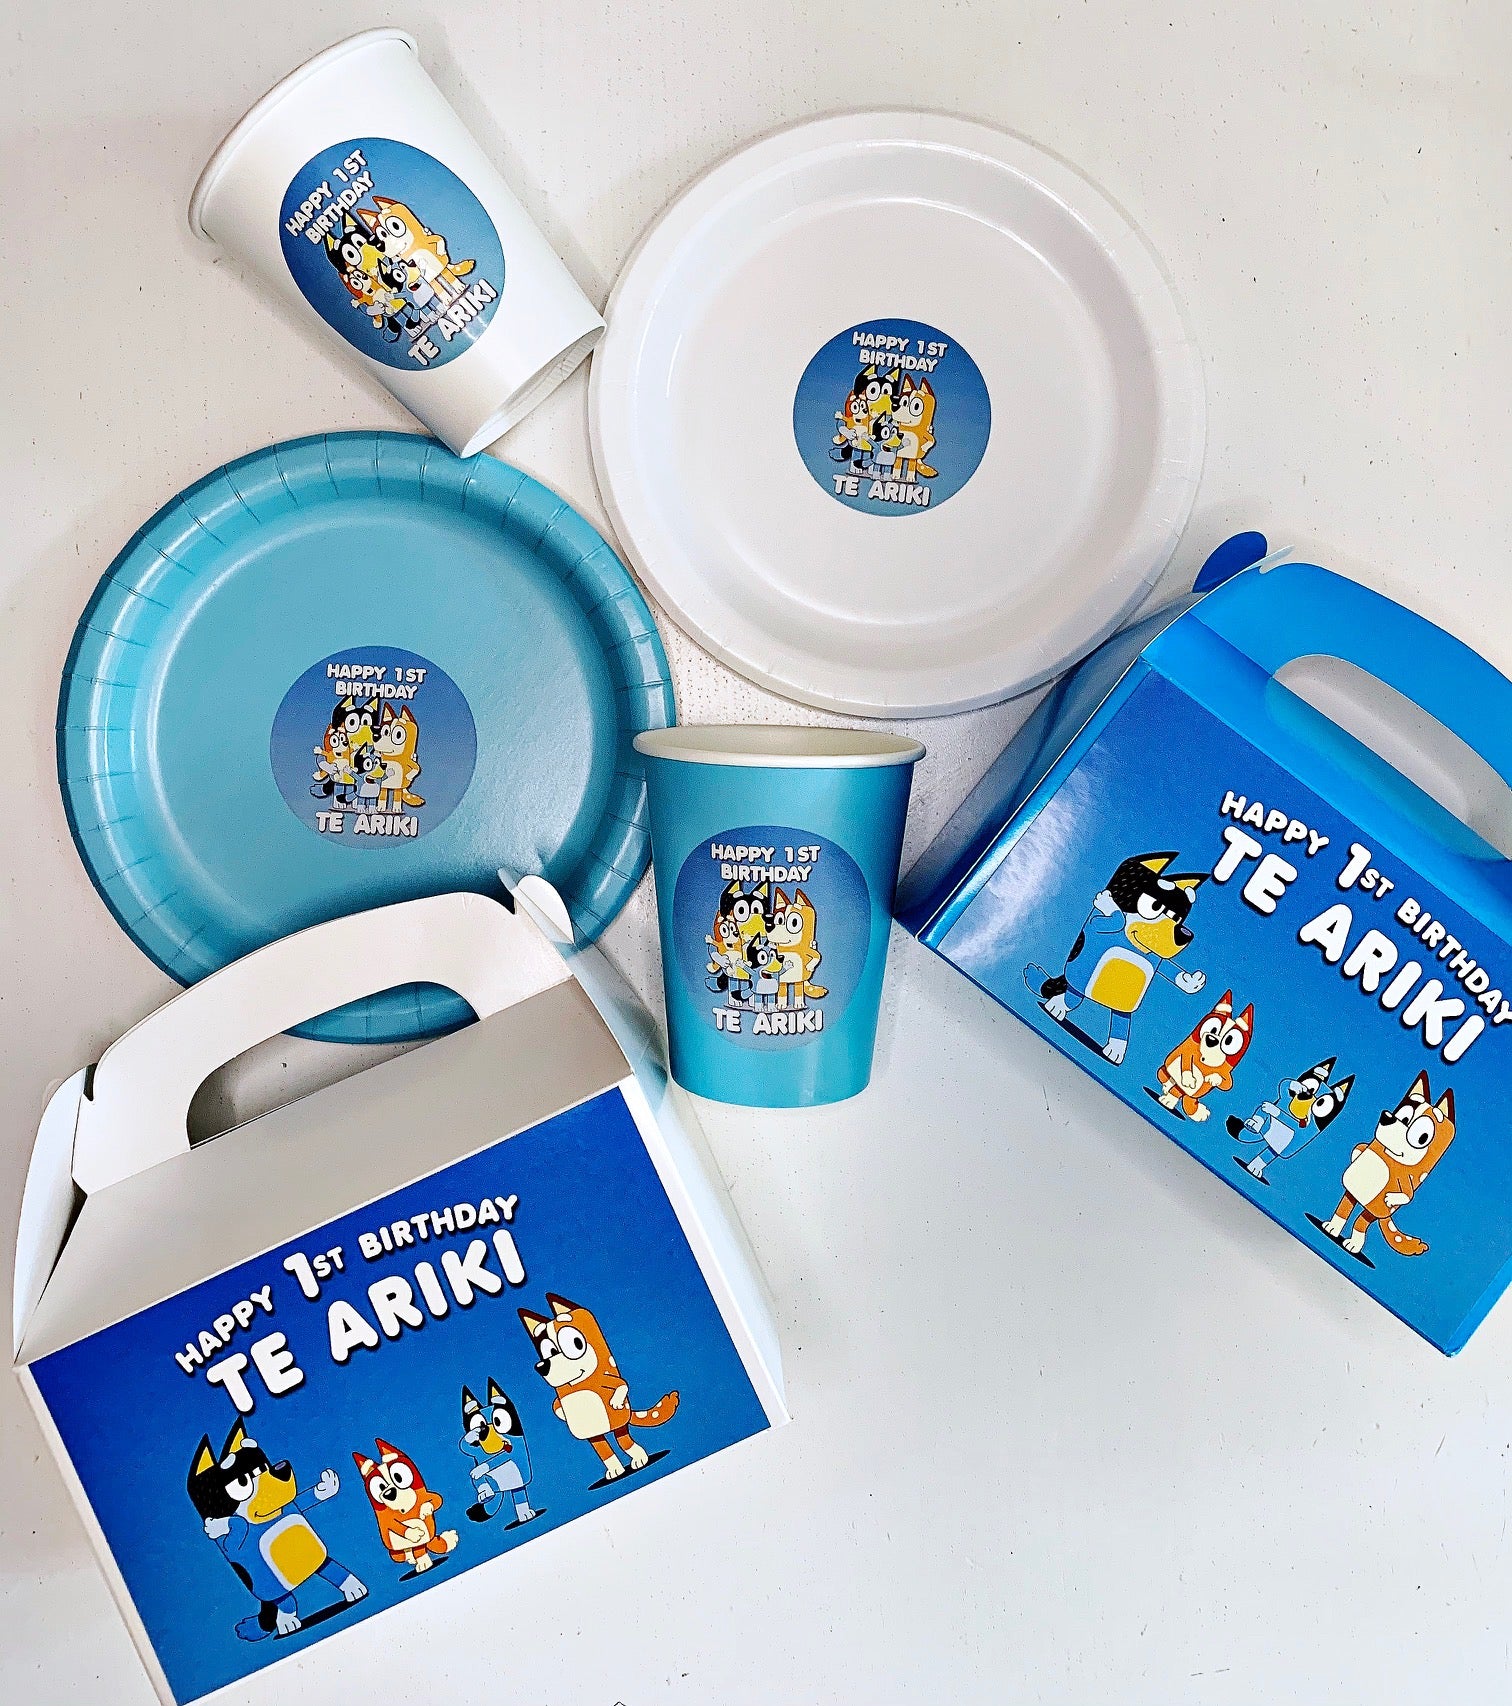 Bluey party supplies